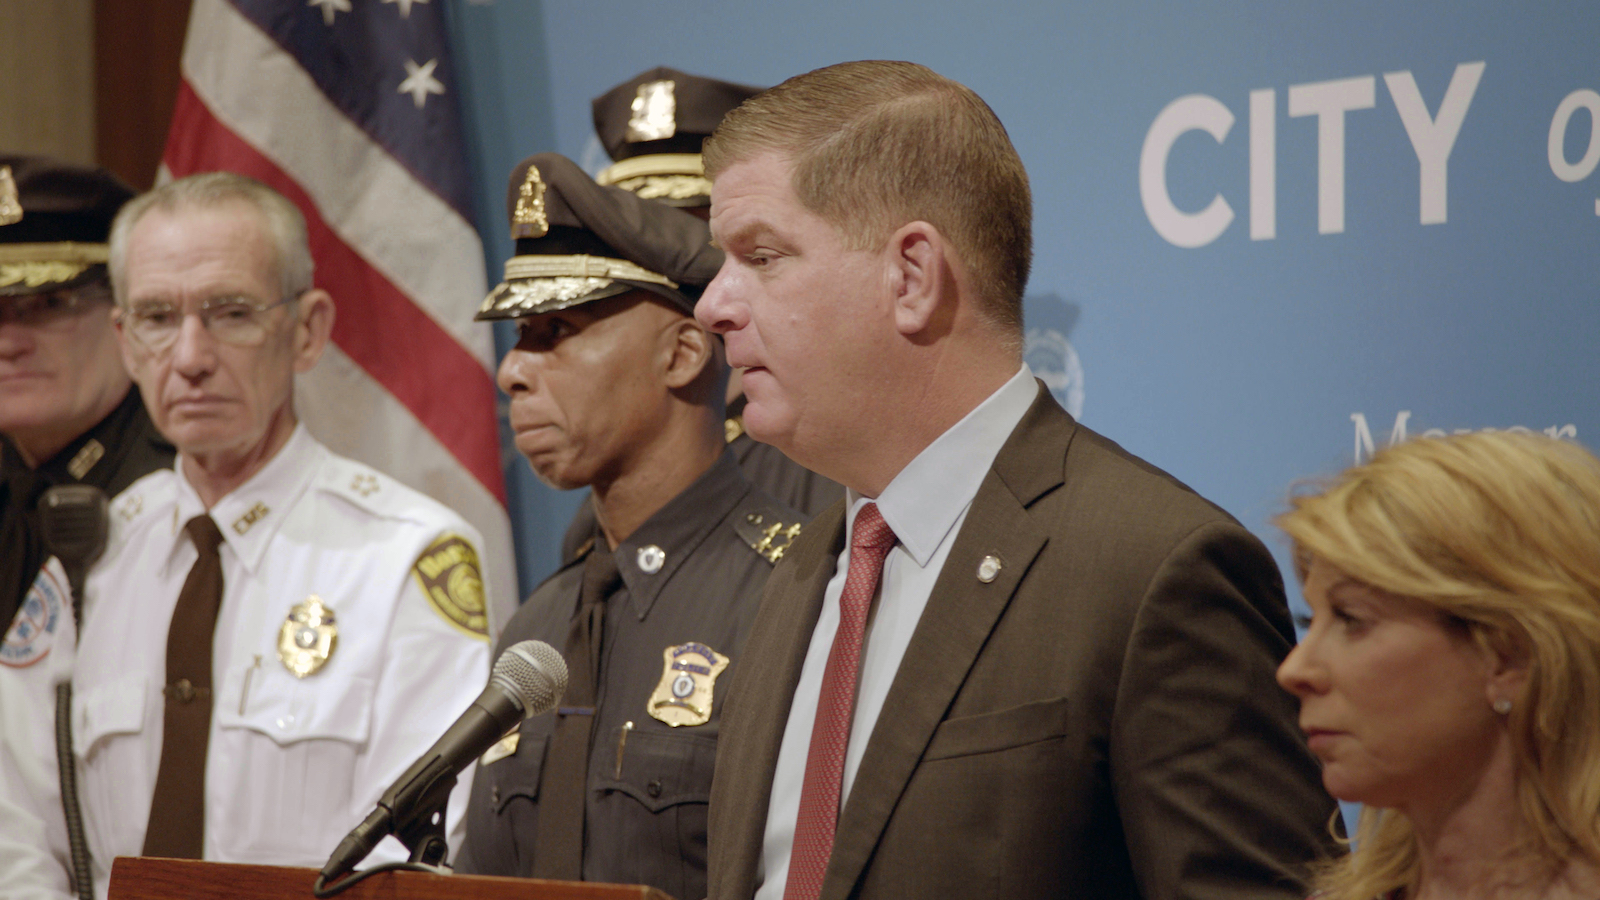 Marty Walsh in City Hall